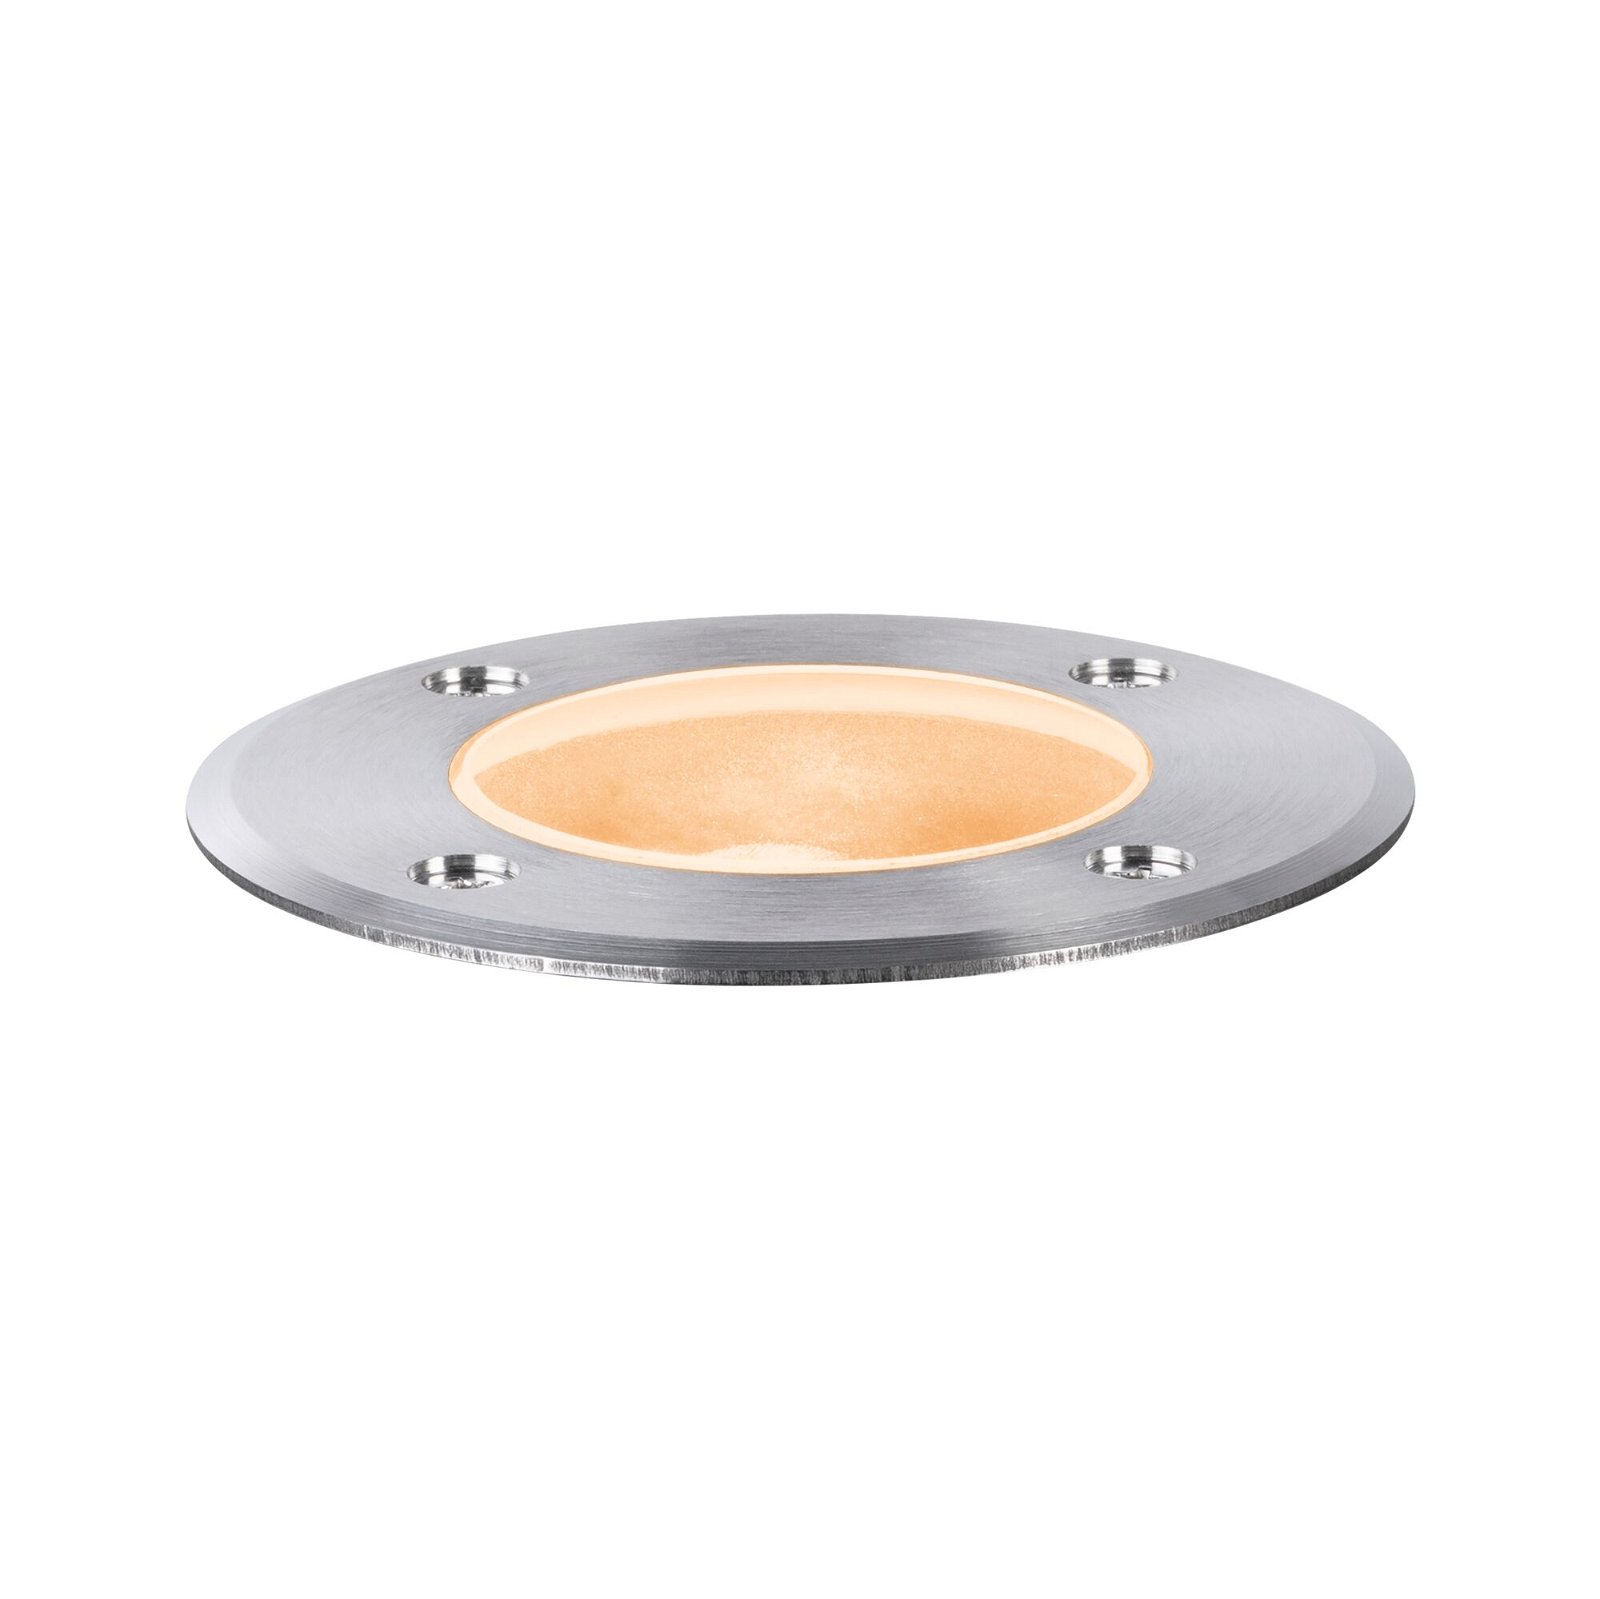 LED Recessed floor luminaire Gold light insect friendly IP65 110mm 2200K 4,3W 320lm 230V 38-38° Semi-crown gold Stainless steel/Plastic